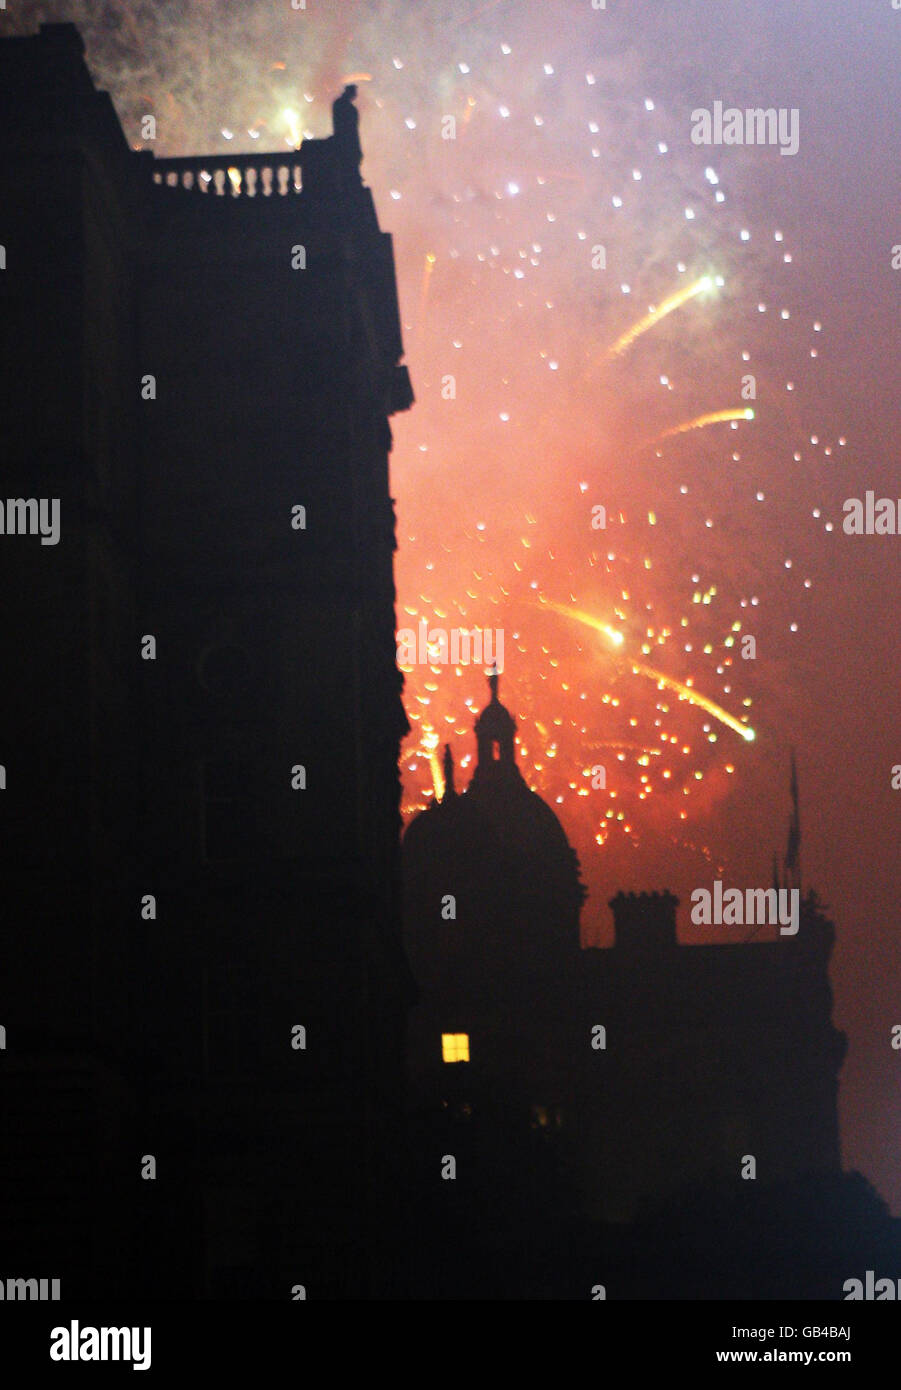 Edinburgh celebrates the end of the Edinburgh International Festival with fireworks concert music performed live by the Scottish Chamber Orchestra, with a choreographed firework display. Stock Photo